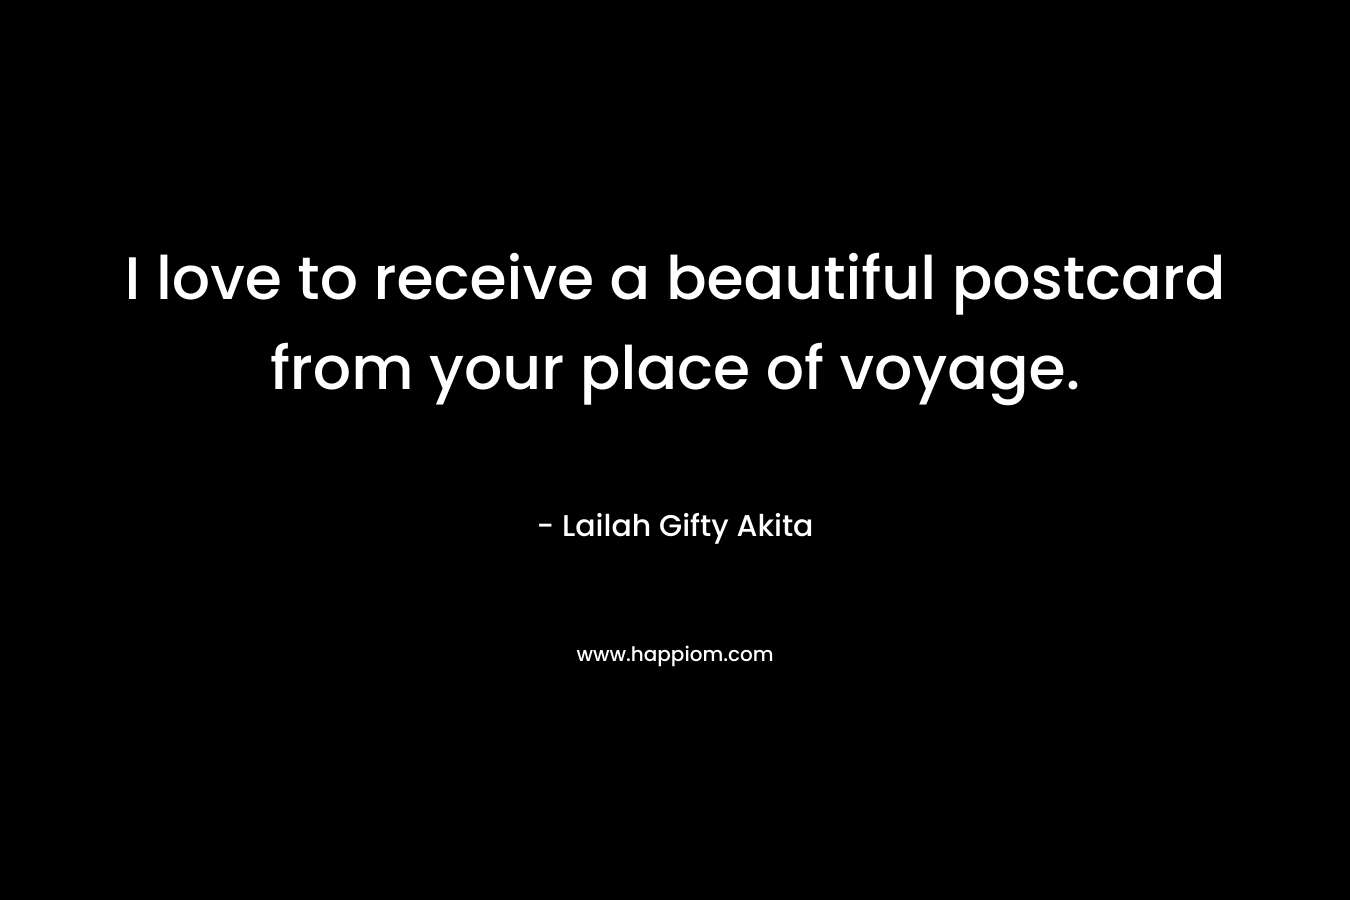 I love to receive a beautiful postcard from your place of voyage. – Lailah Gifty Akita